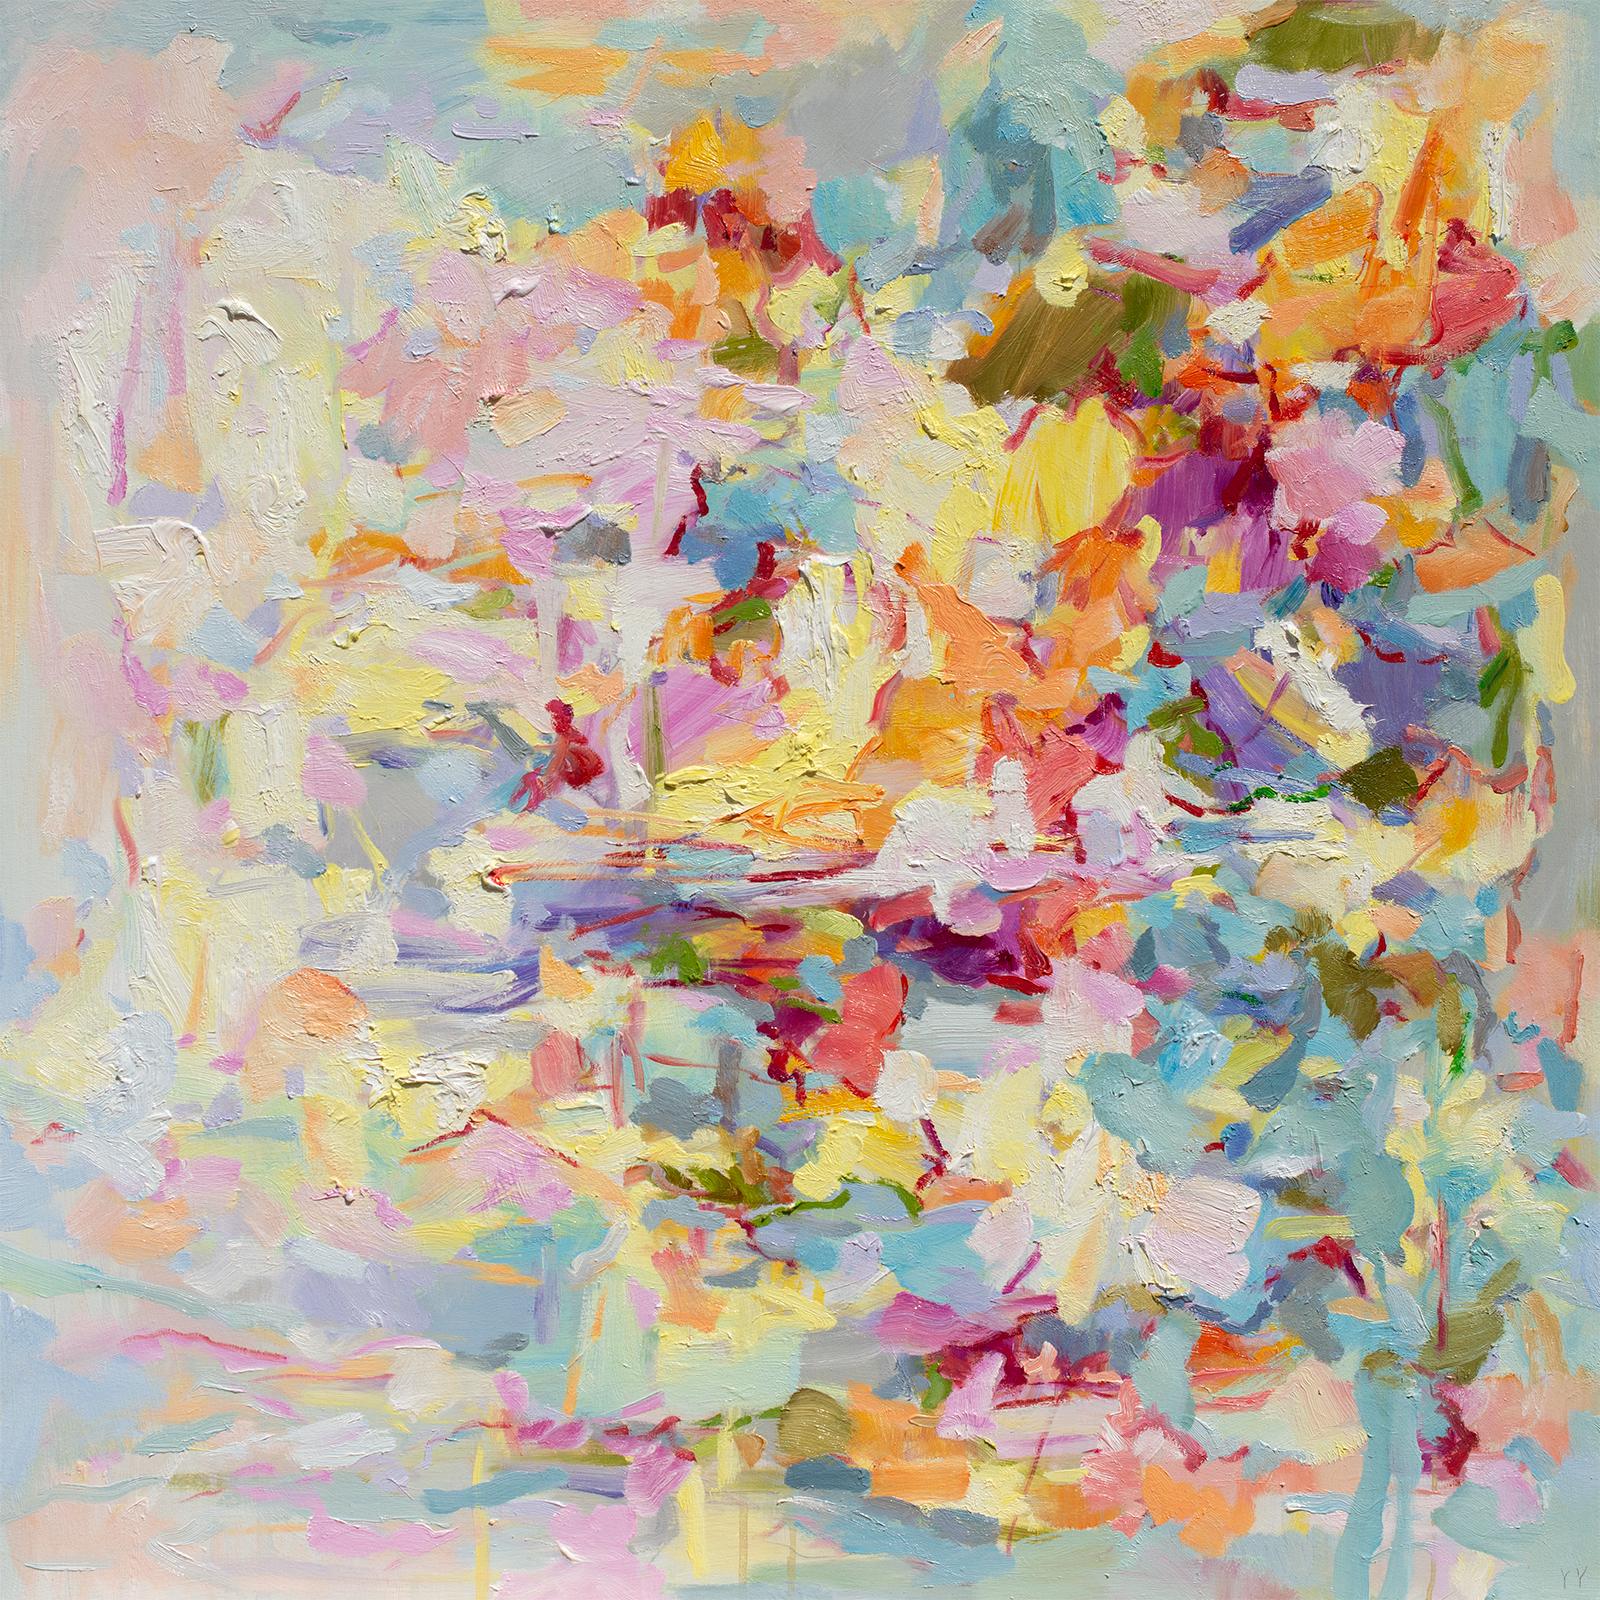 'Vibration' 2023 by Chinese/Canadian artist Yangyang Pan. Oil on canvas, 36 x 36 in. / Frame: 37 x 37 in. This beautiful abstract-expressionistic, landscape painting incorporates gestural brushstrokes resembling a floral garden in pastel colors of